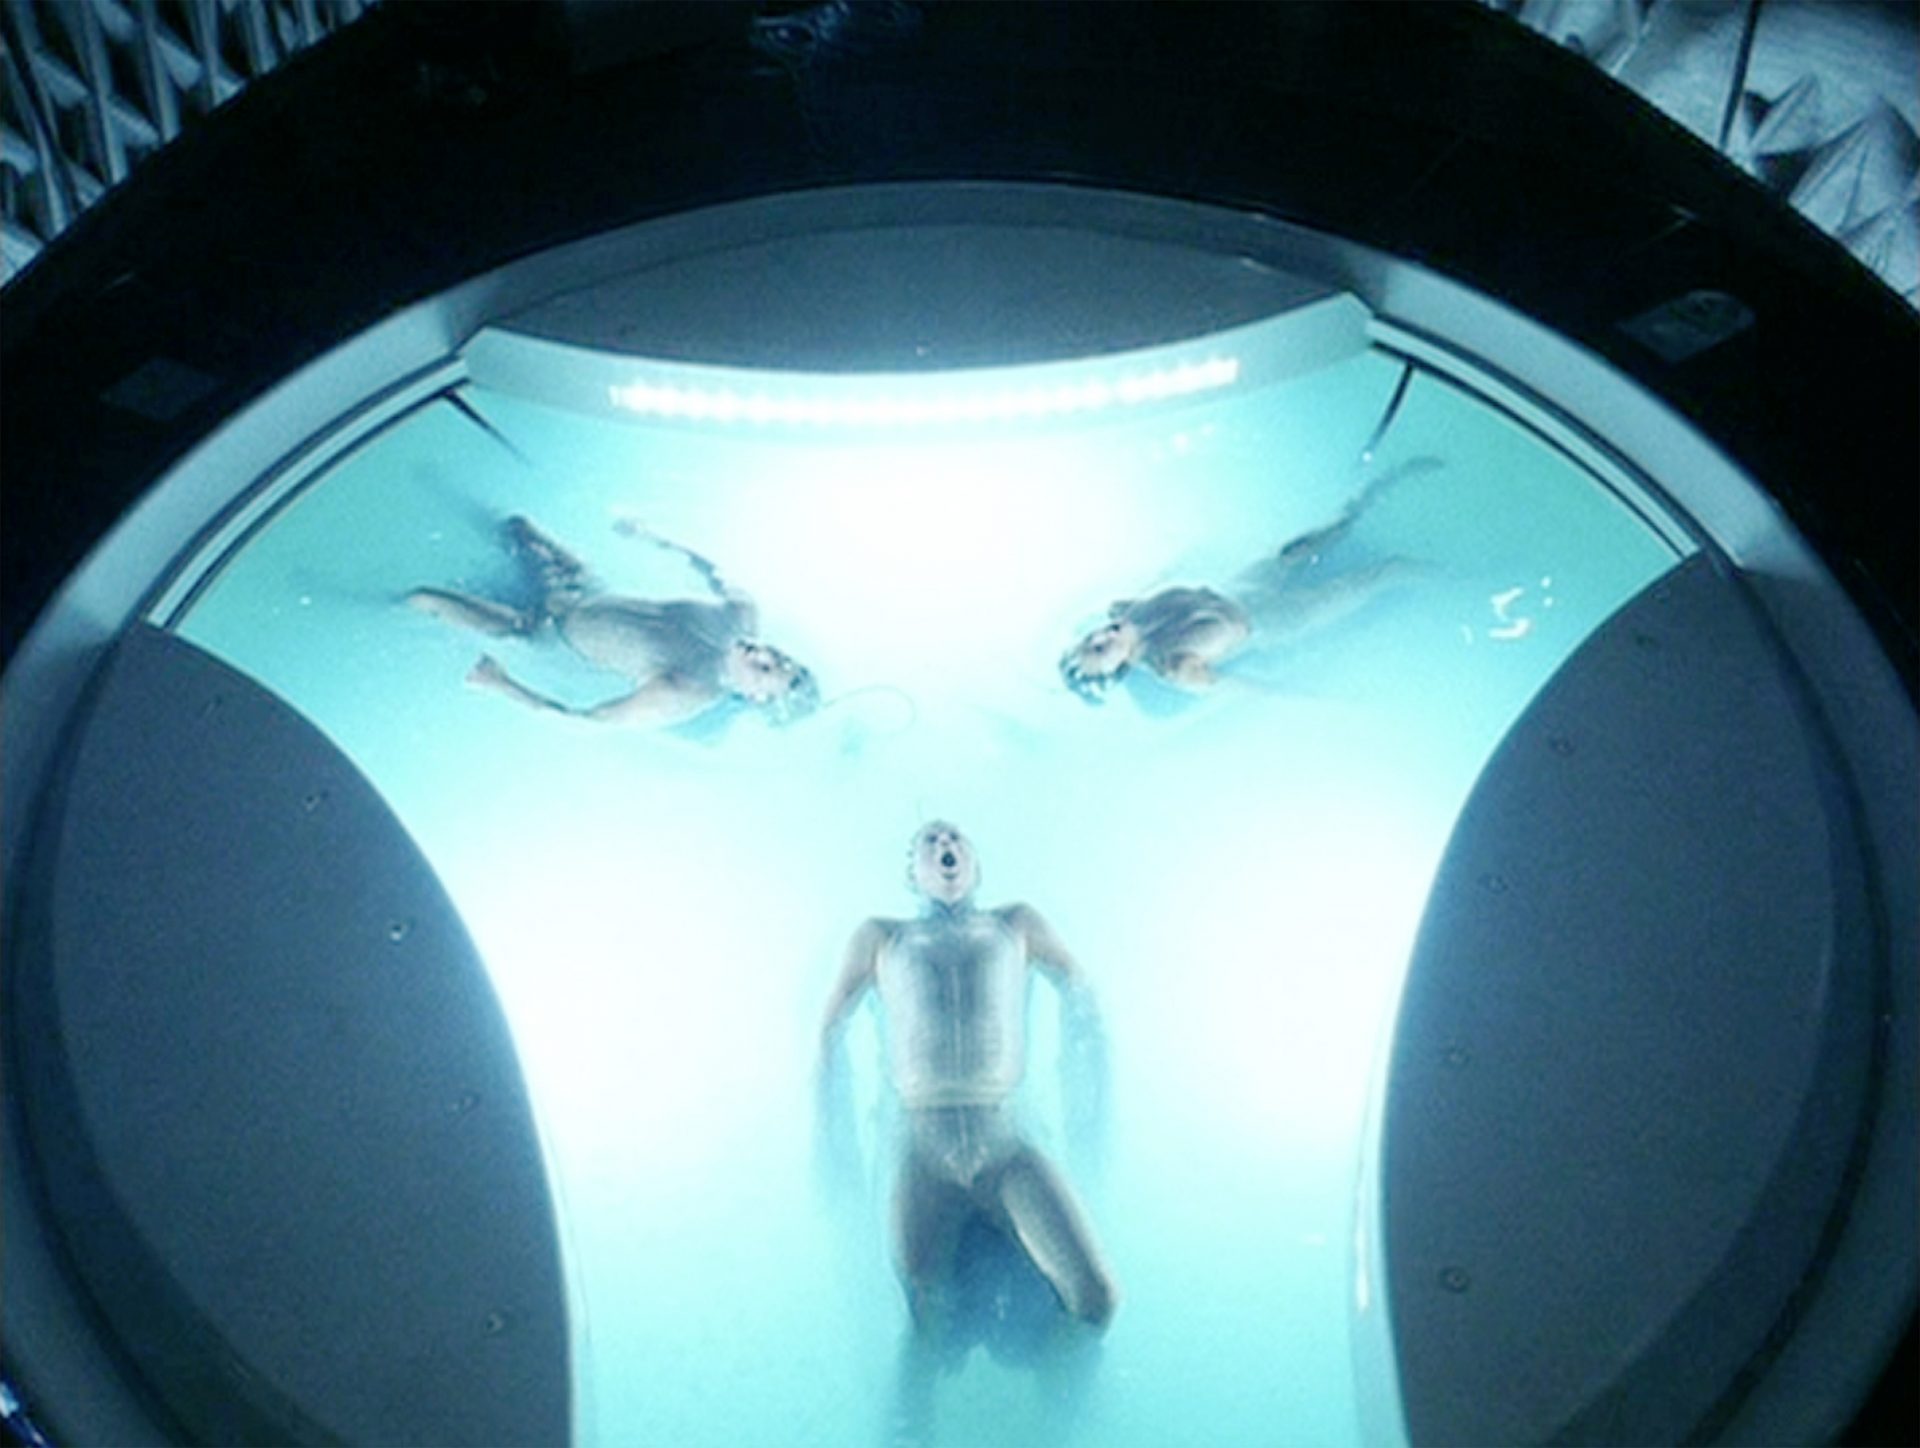 PreCogs from the department of precrime in Minority Report, based on a short story by Philip K. Dick. Photo: CBS via Getty
Images.